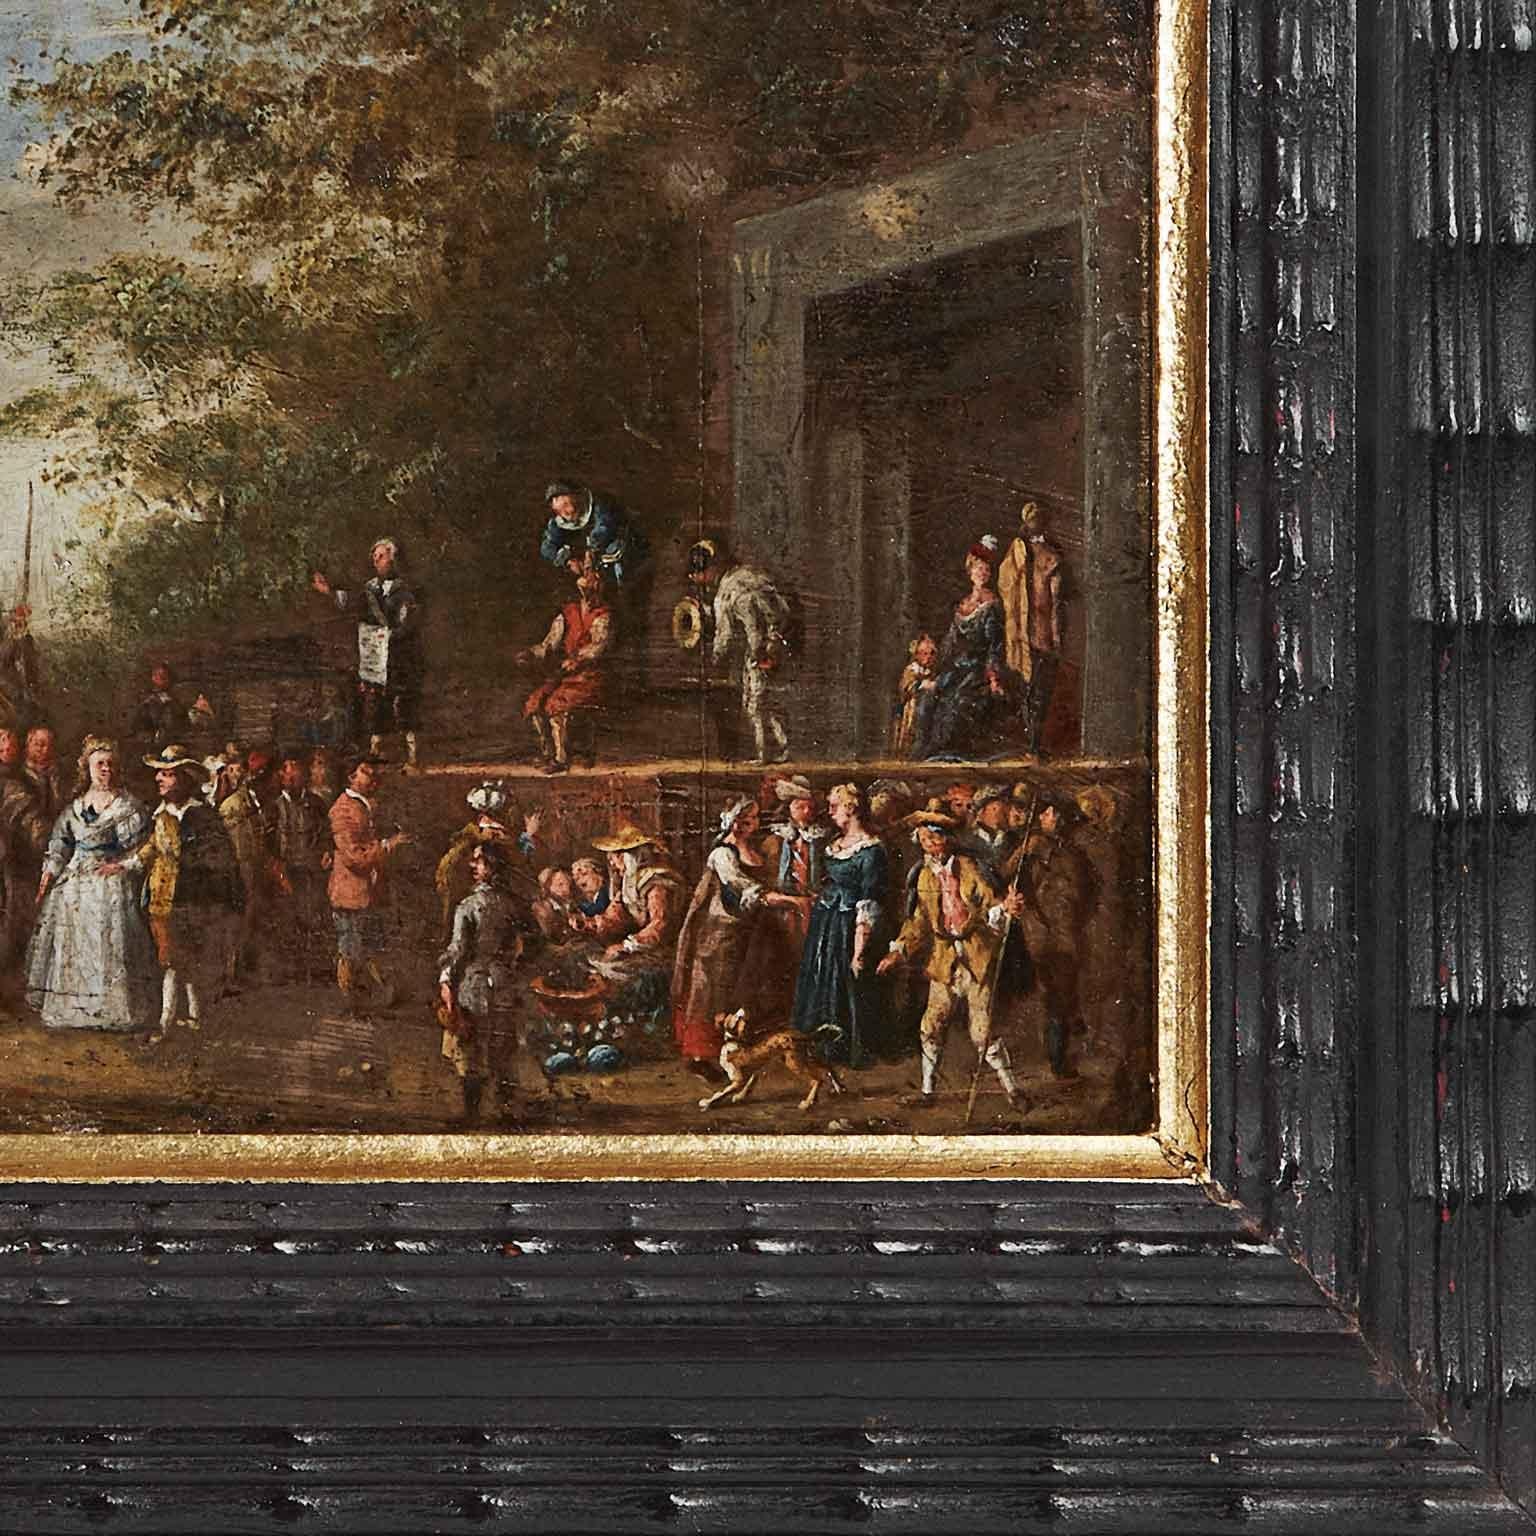 Carved 17th Century Flemish Old Master Painting on Copper Italian Comedy Scene For Sale